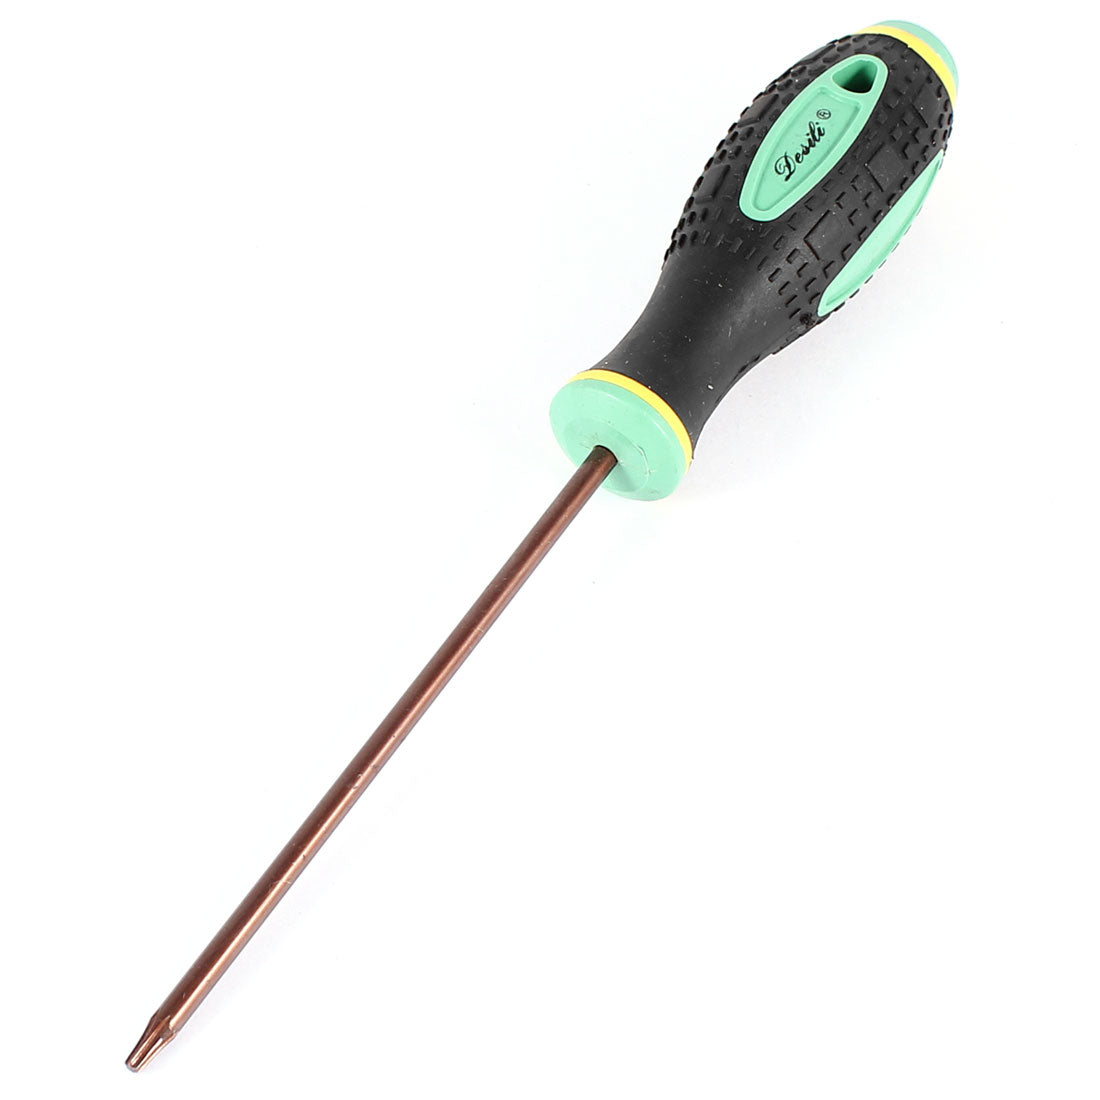 uxcell Uxcell Repair Tool Nonslip Handle Grip 100mm Long T8 Torx Point Magnetic Tip Screwdriver